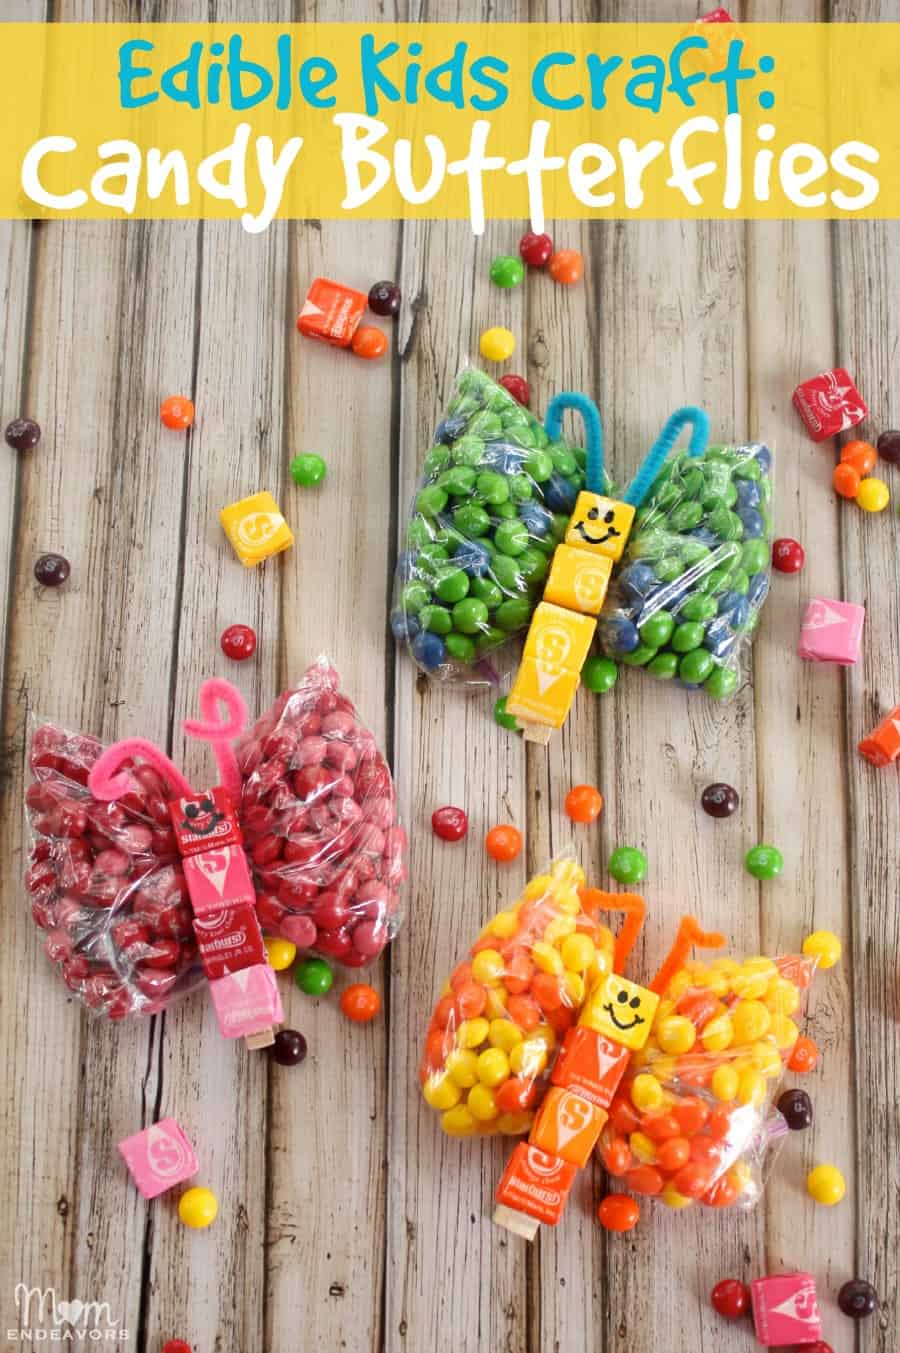 15 exquisite crafts made with candies